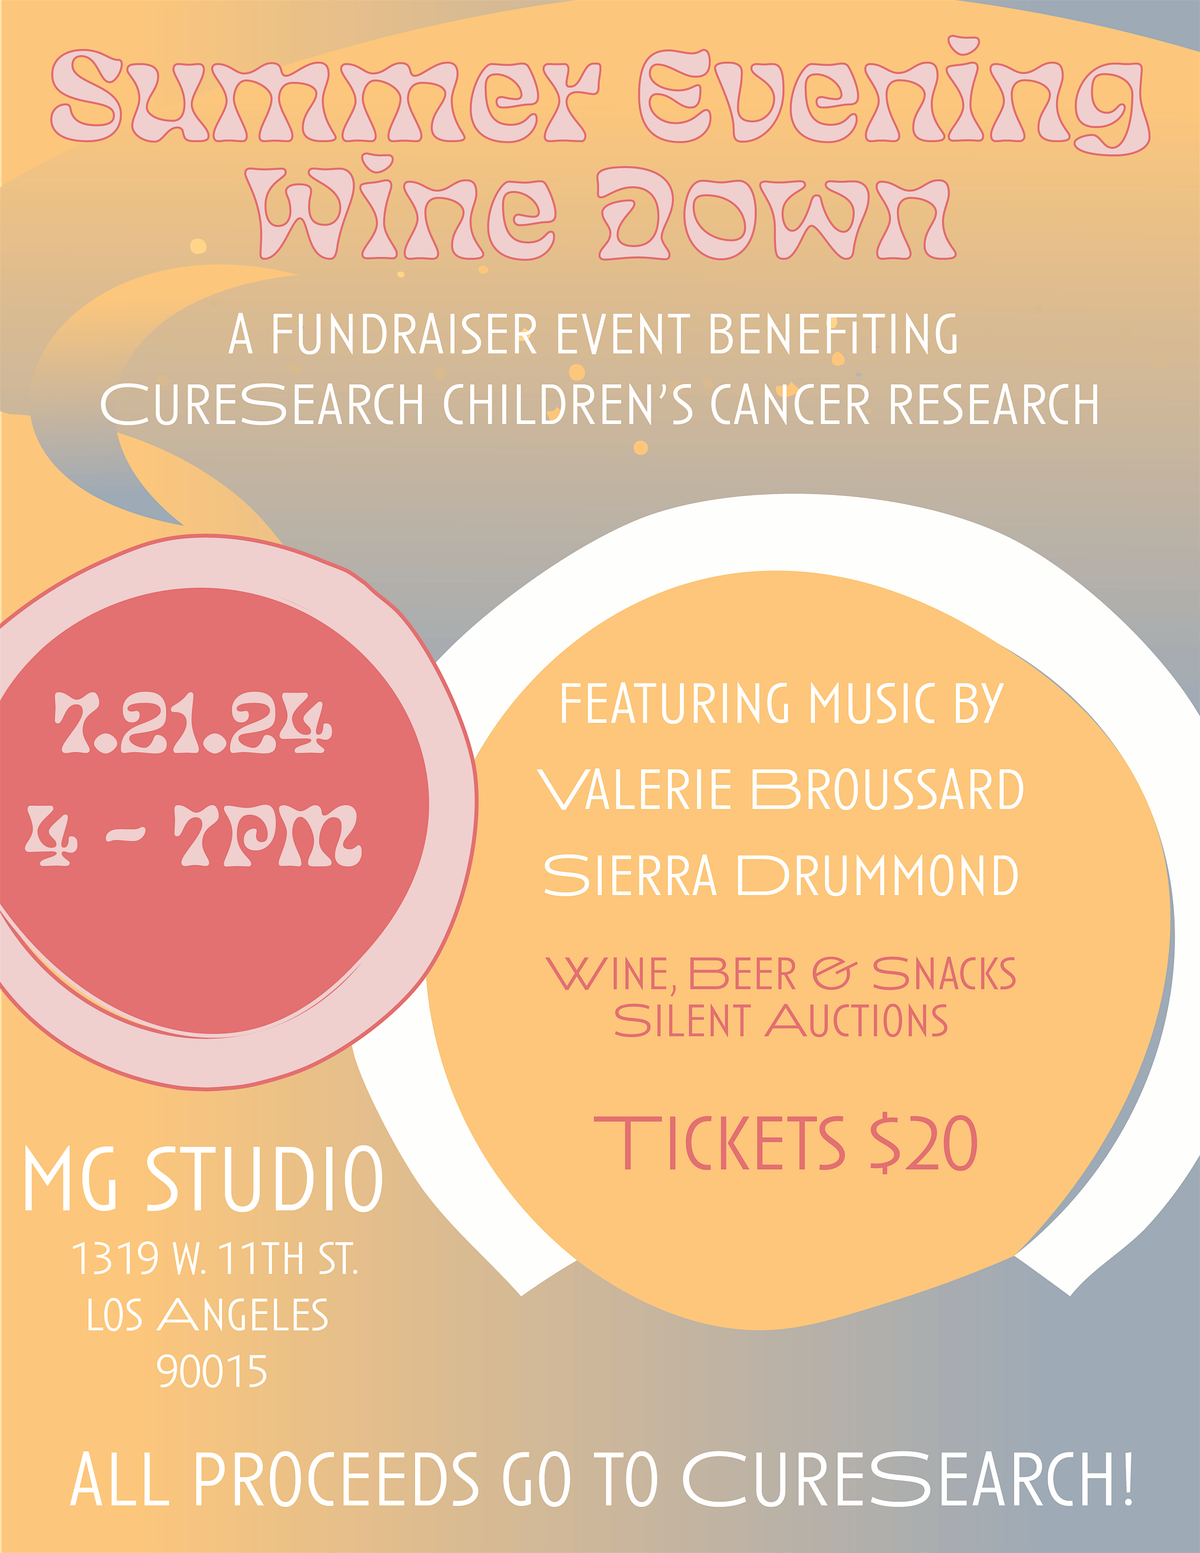 Summer Evening Wine Down - A Fundraiser Benefiting CureSearch